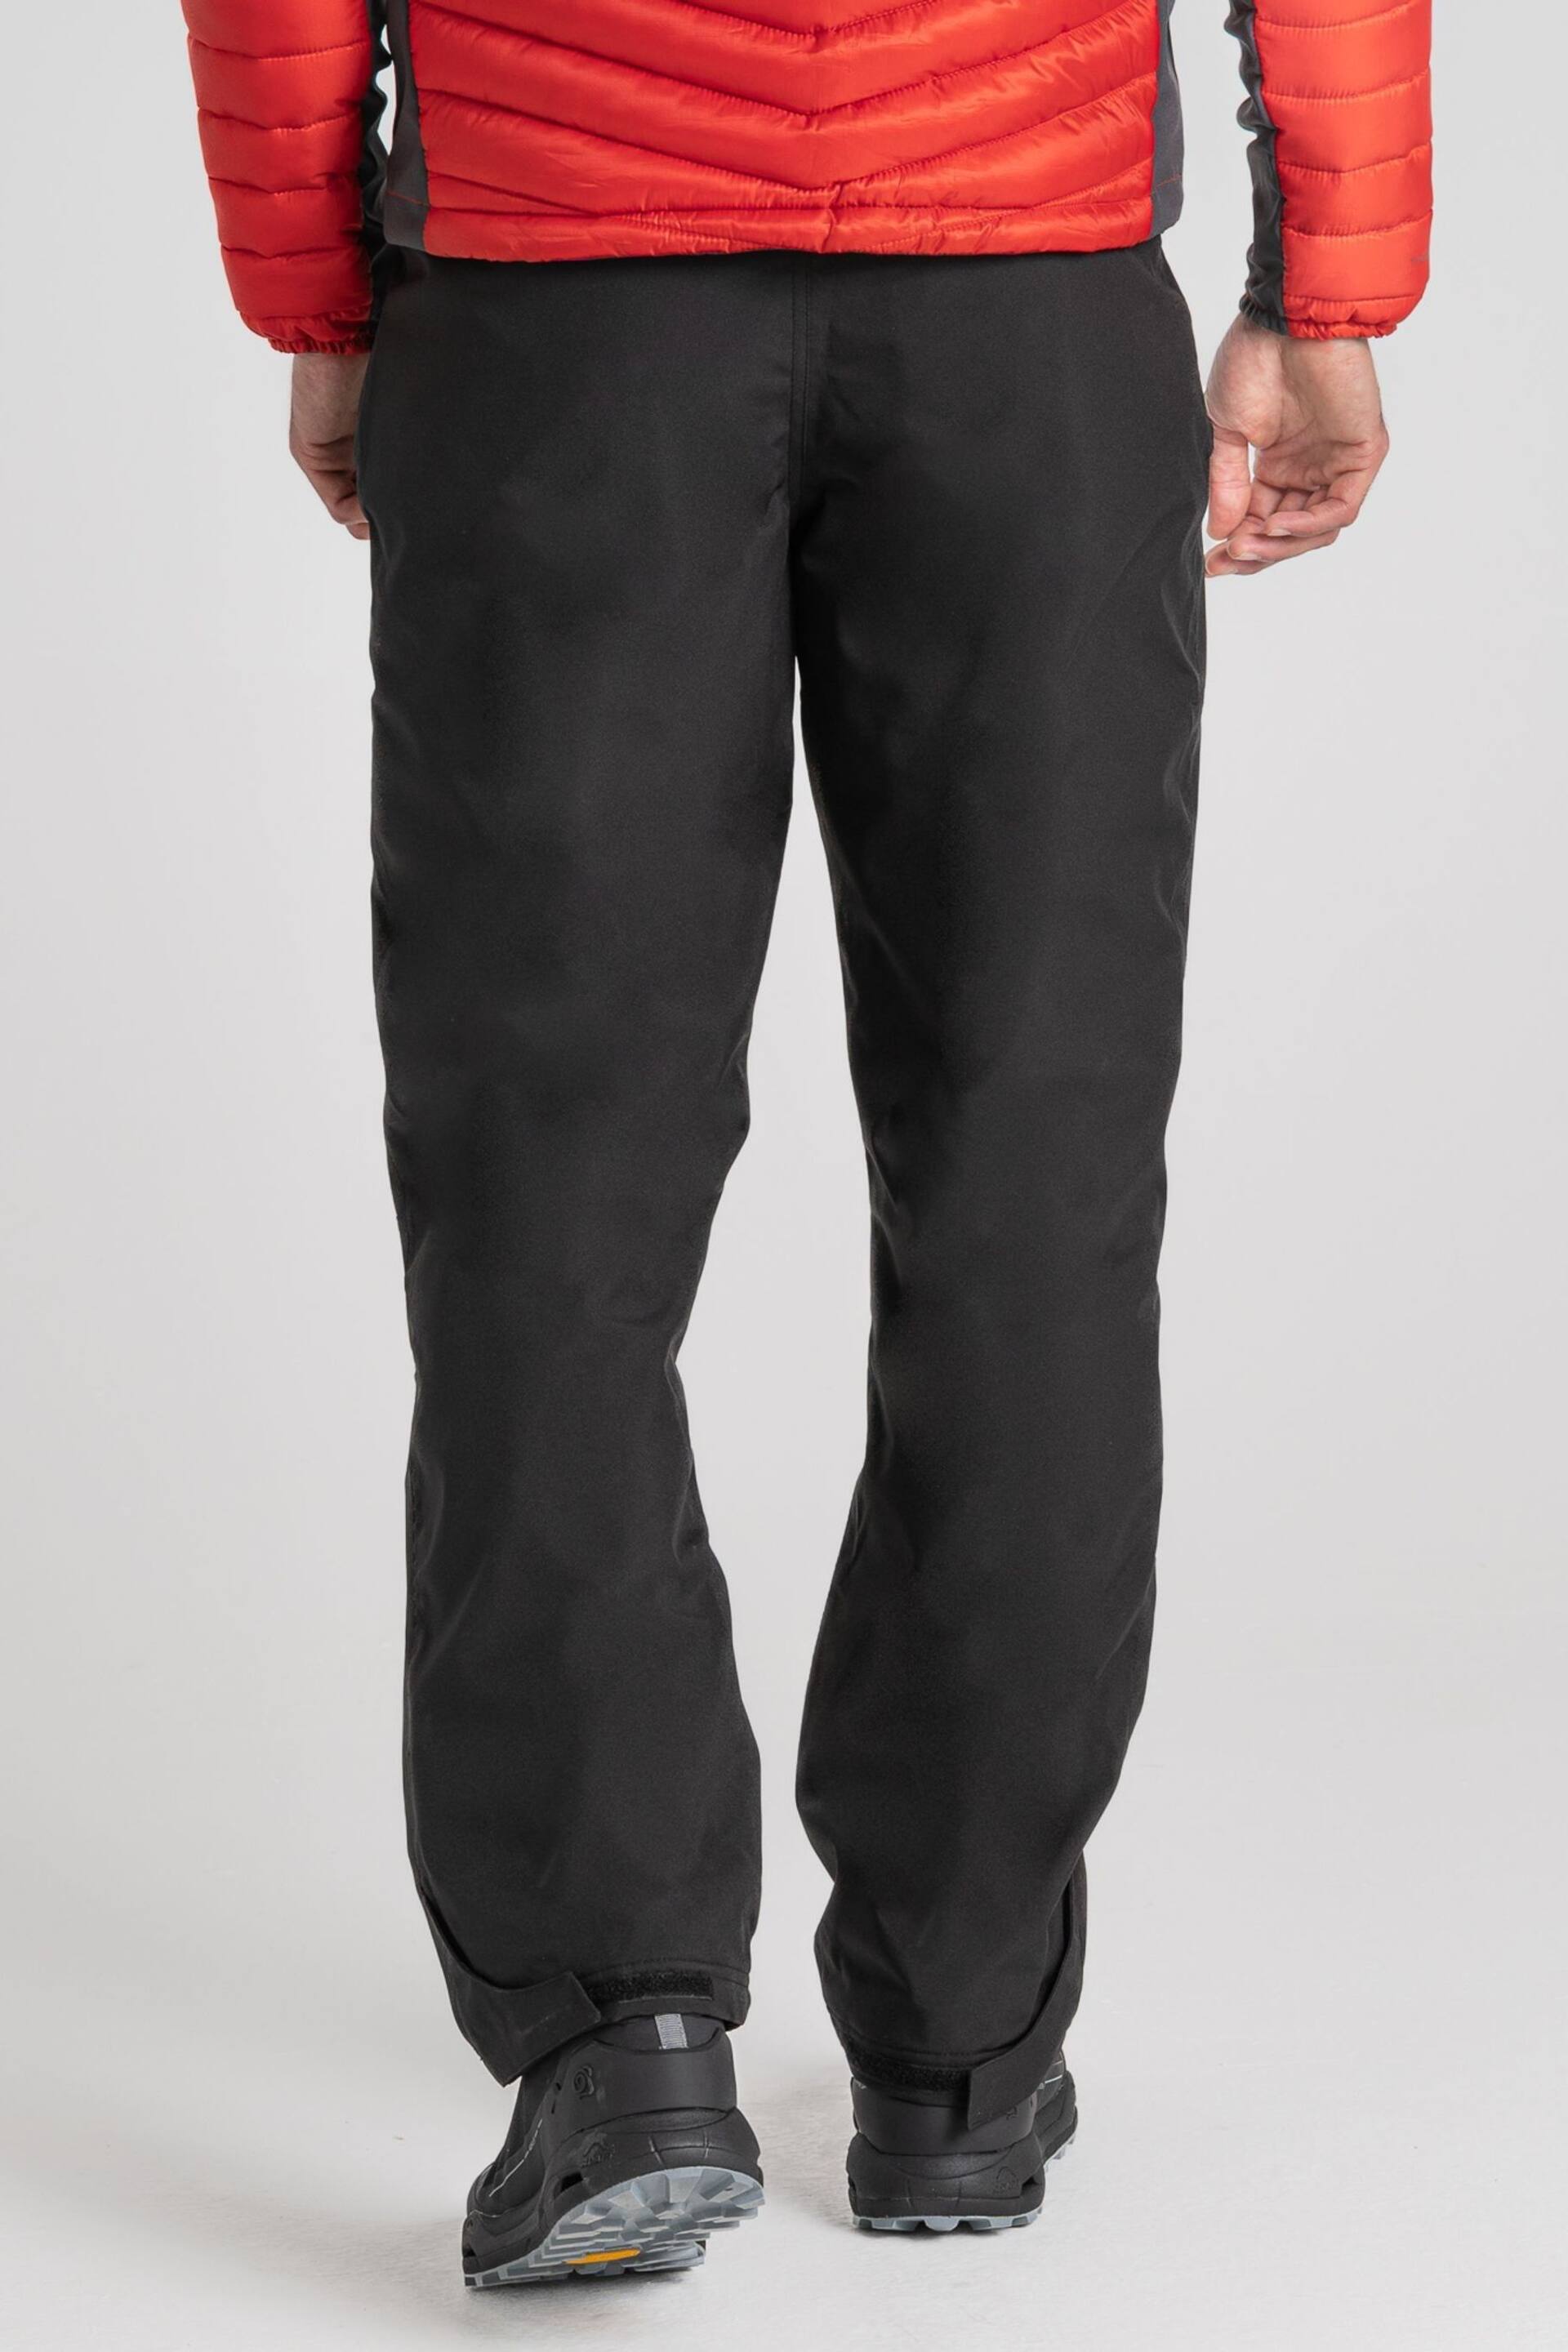 Craghoppers Steall Thermo Black Trousers - Image 2 of 7